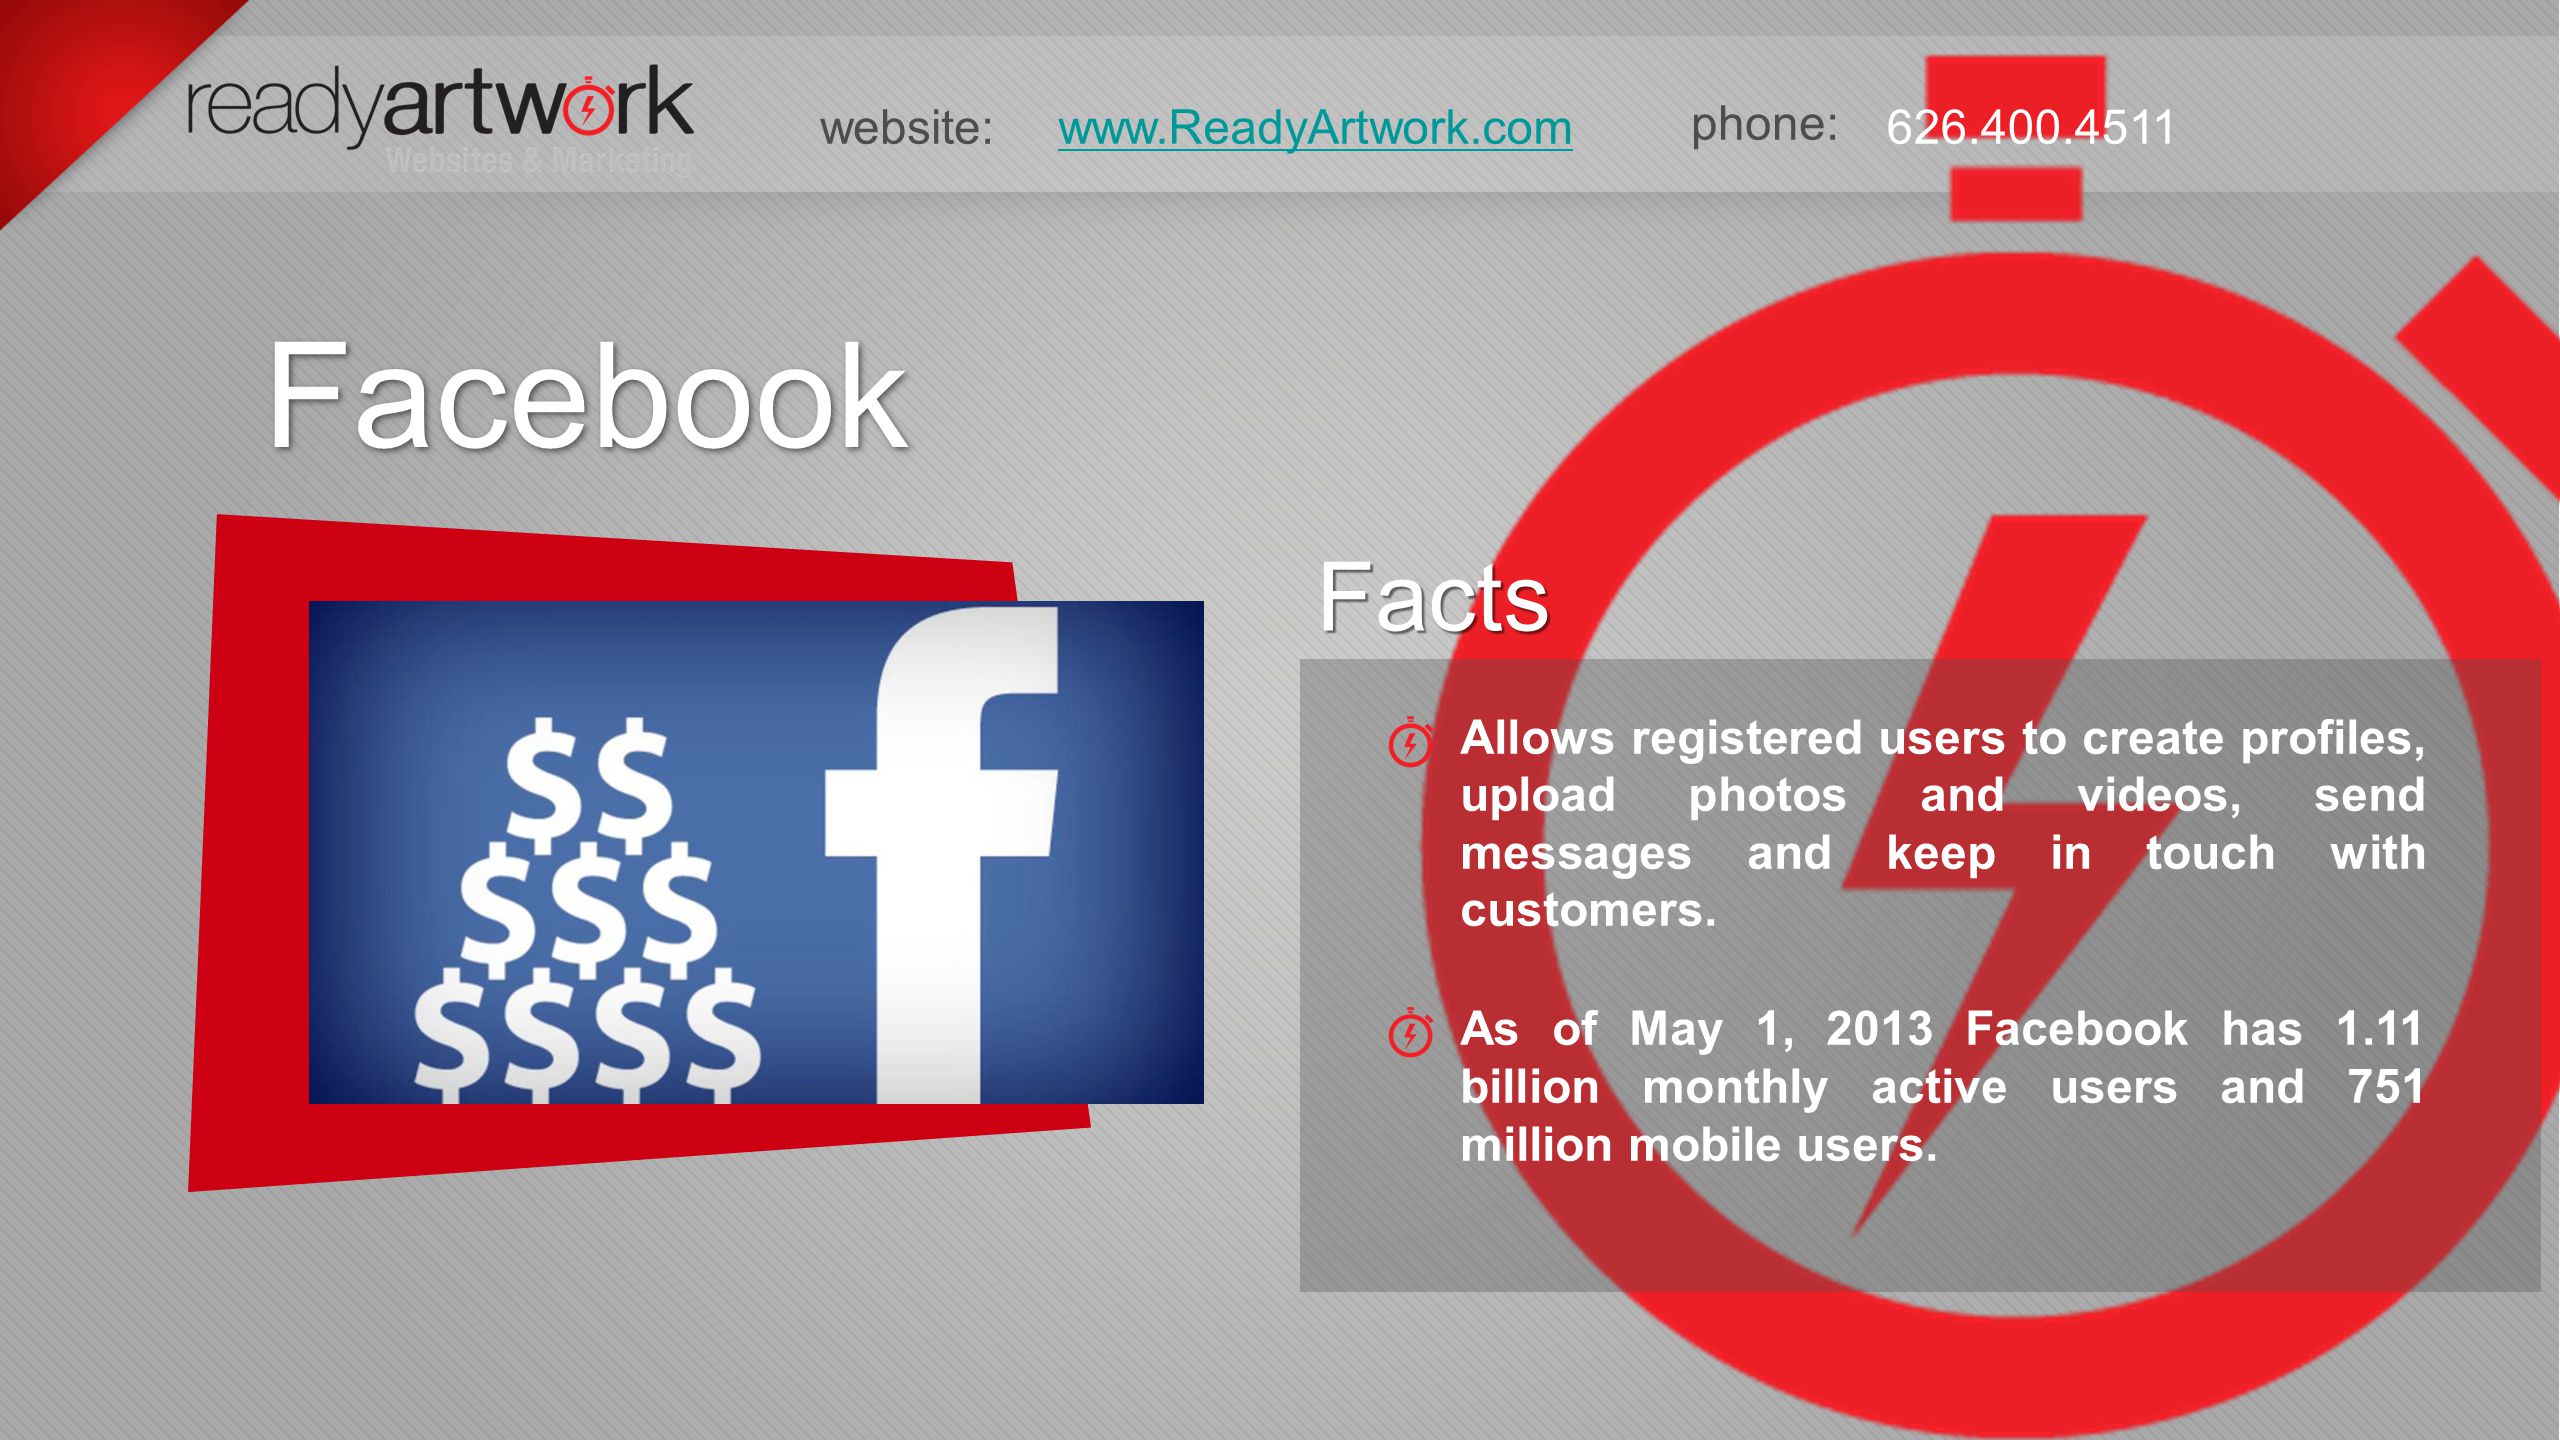 phone: website: Facebook Facebook Facts Facts Allows registered users to create profiles, upload photos and videos, send messages and keep in touch with customers.